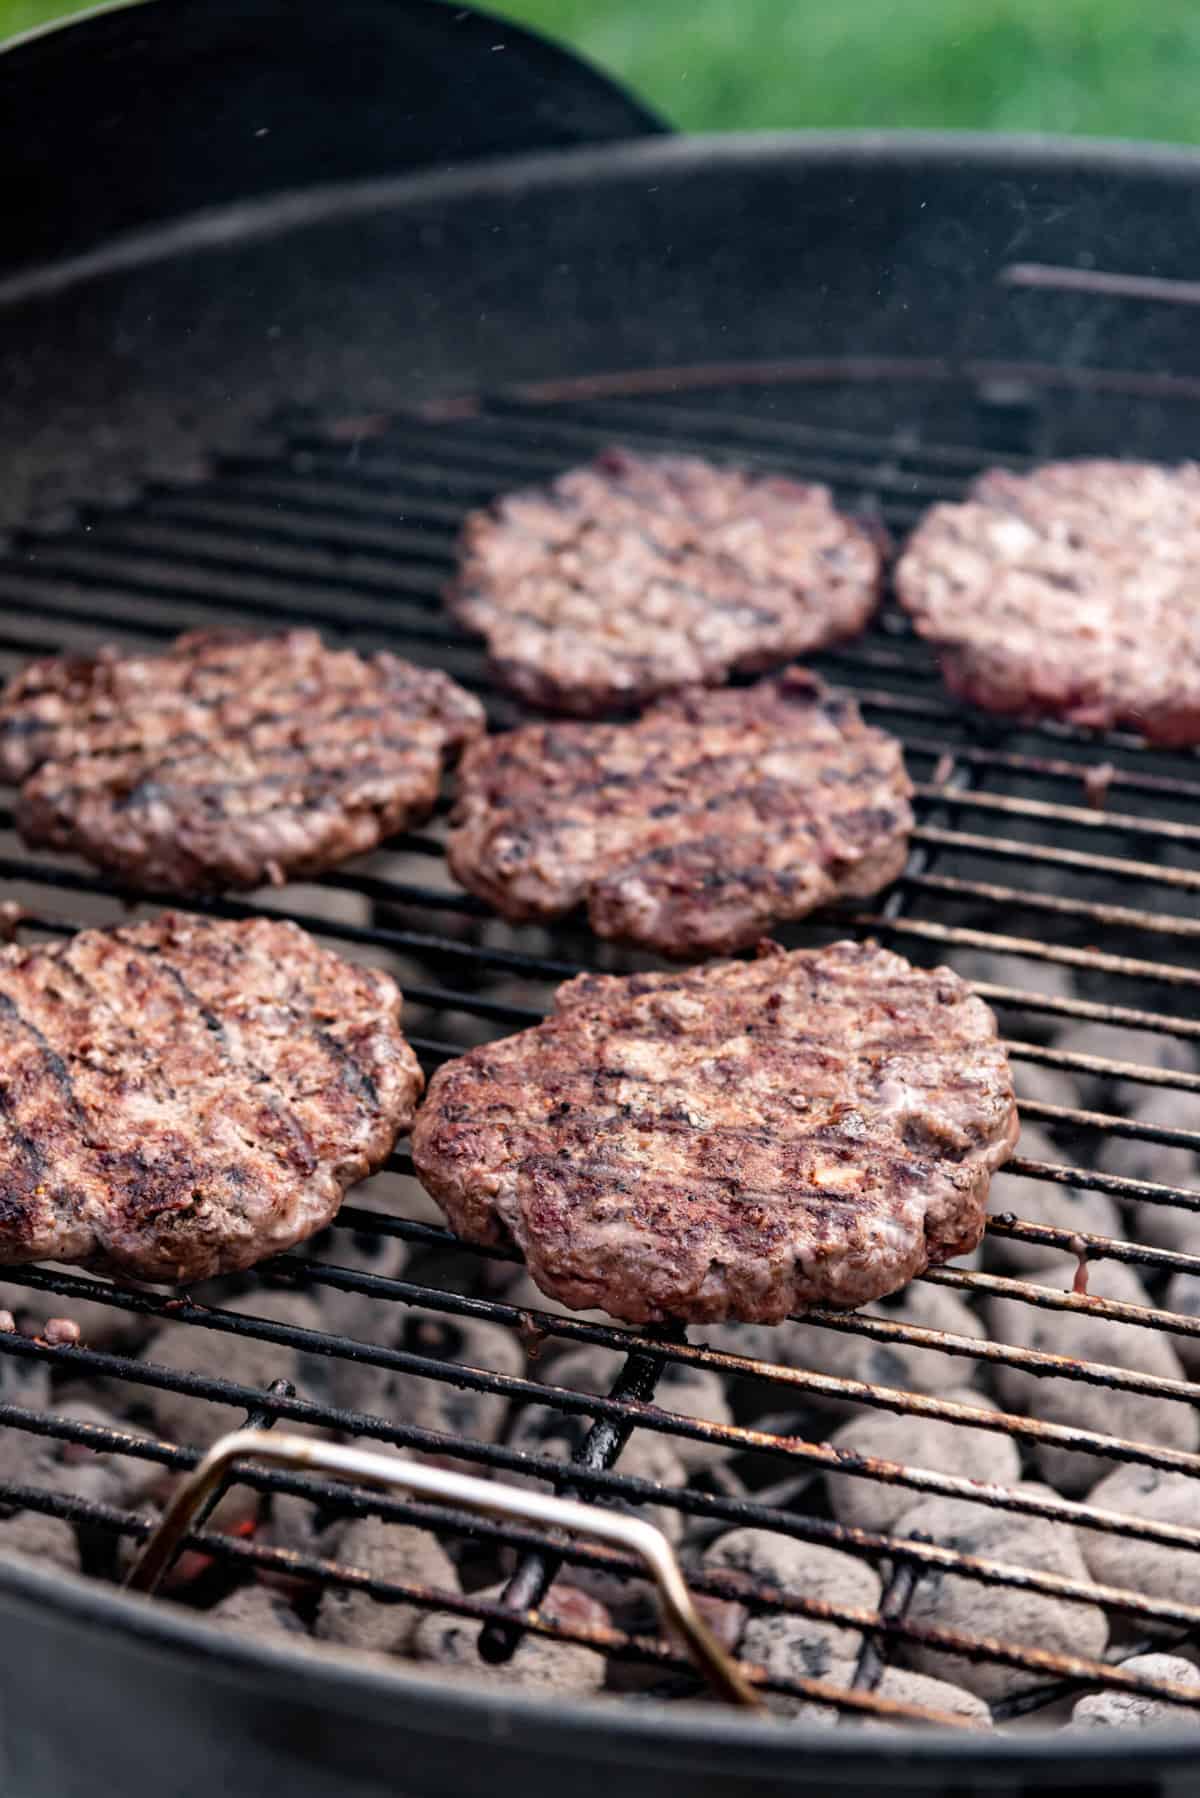 Flipping bison burgers on a charcoal grill.